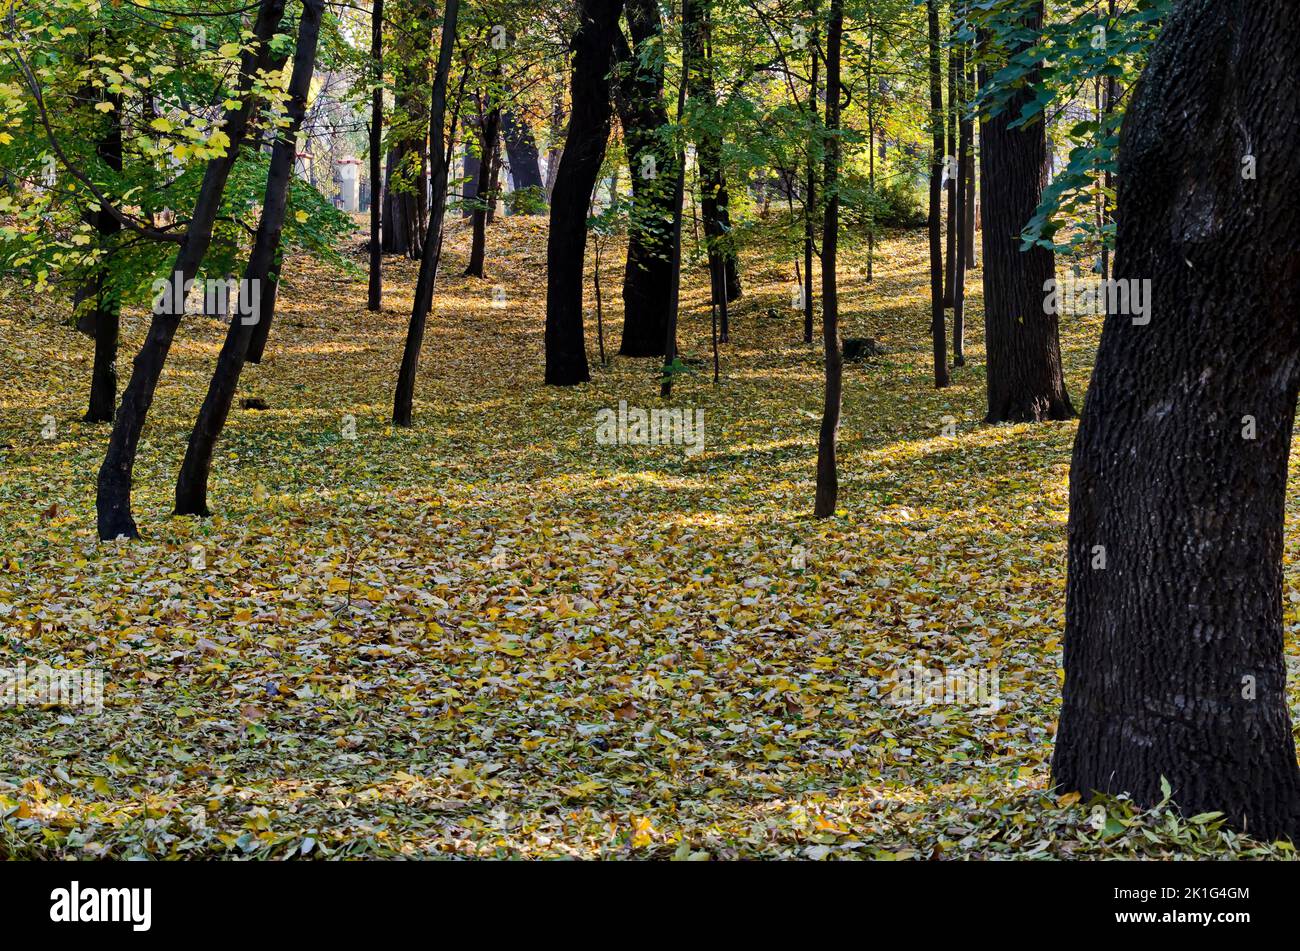 A colorful autumn forest with beautiful branching trees with lots of yellow, green and brown leaves, some of which covered the ground profusely, Sofia Stock Photo